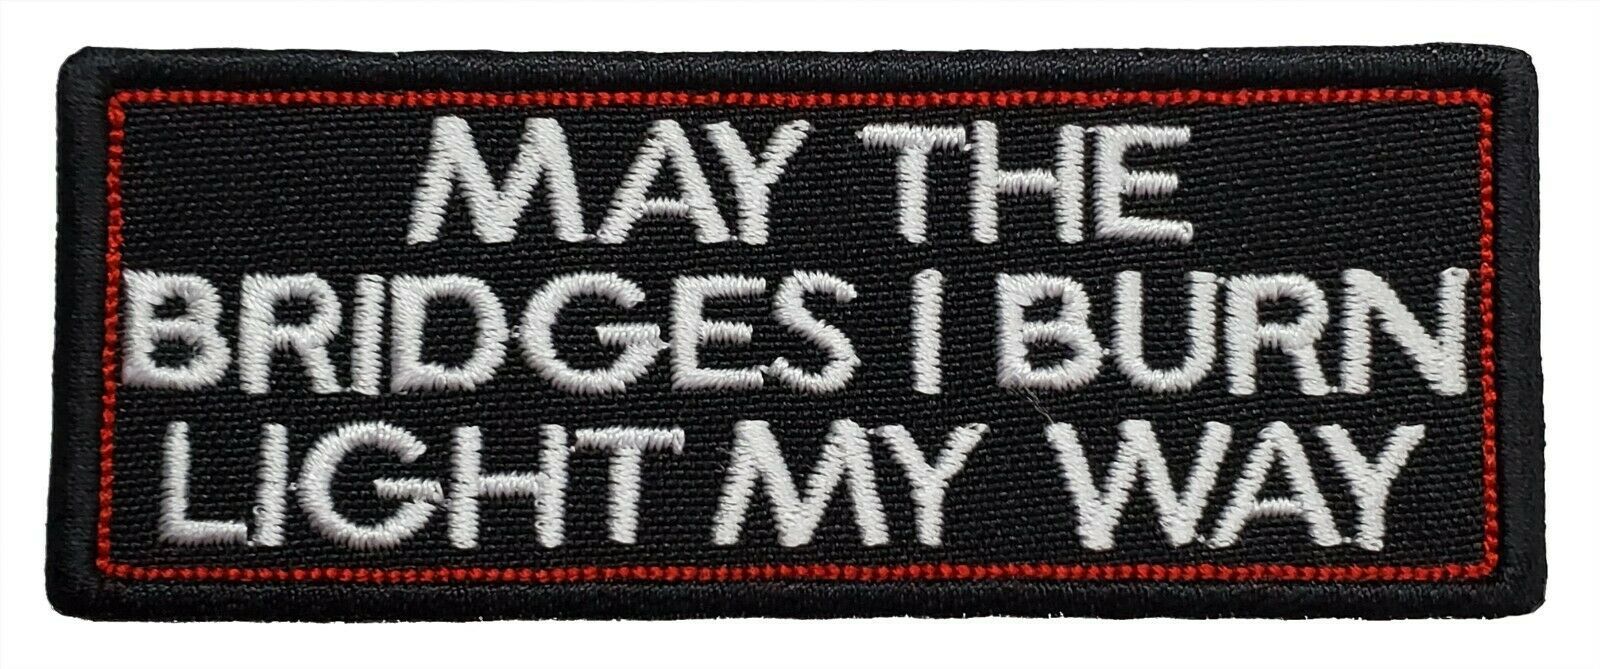 May the Bridges I Burn Light My Way Embroidered Applique Iron On Patch - $5.50 - $7.49